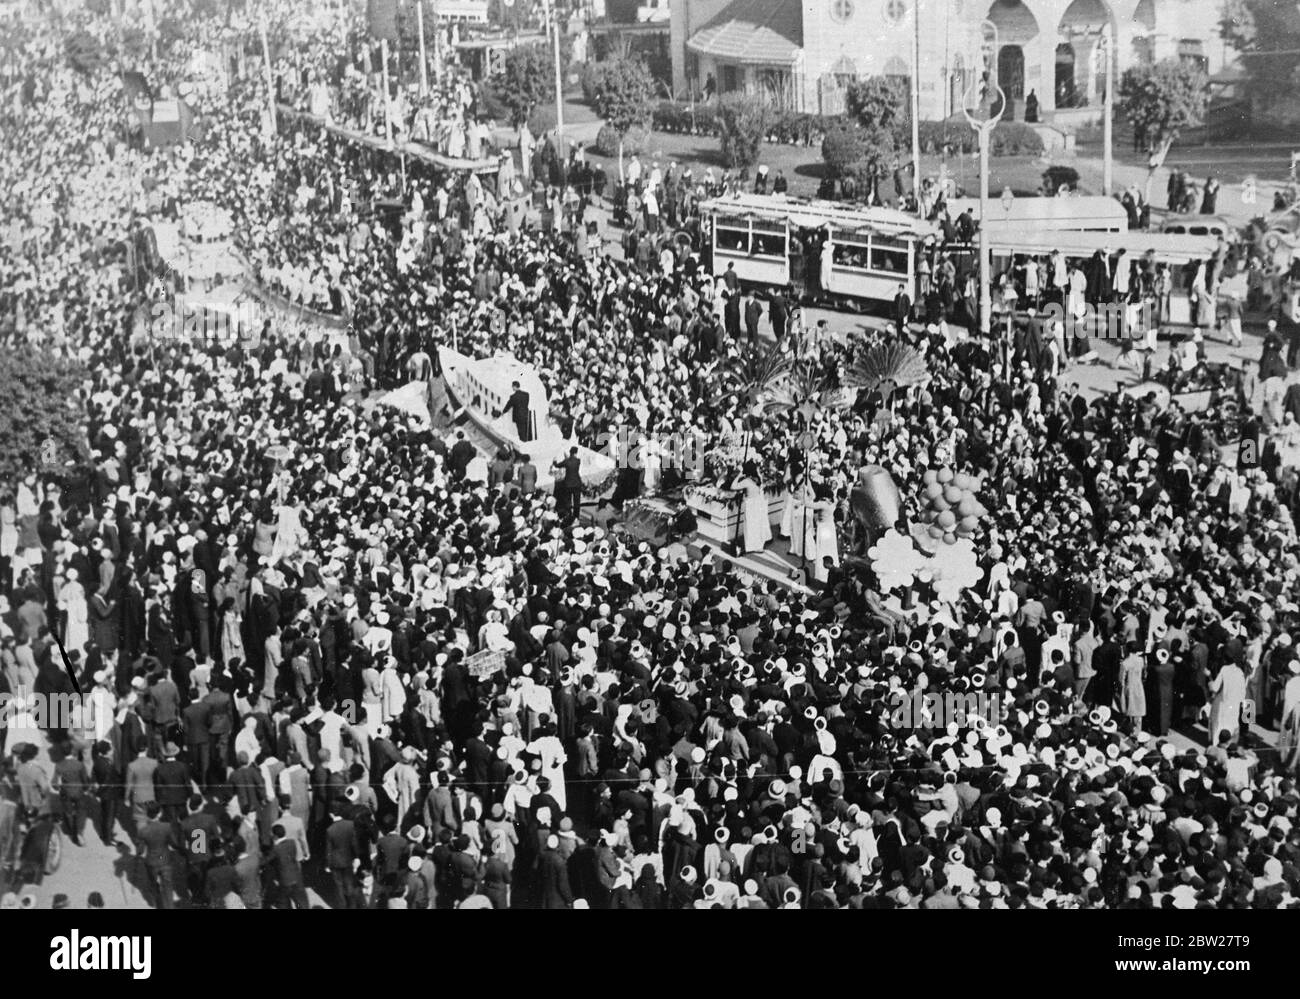 The wedding of King Farouk in Cairo. With traditional Muslim ceremony, 17-year-old King Farouk of Egypt, was married at the Koubbeh Palace in Cairo, to Miss Farida Zulficar Pasha, the judge of the Egyptian court of appeal. Photo shows, Huge crowds watching the procession of decorated floats from the Abdin Palace to the Koubbah Palace as all Cairo joined in the wedding celebrations. 23 January 1938. Stock Photo